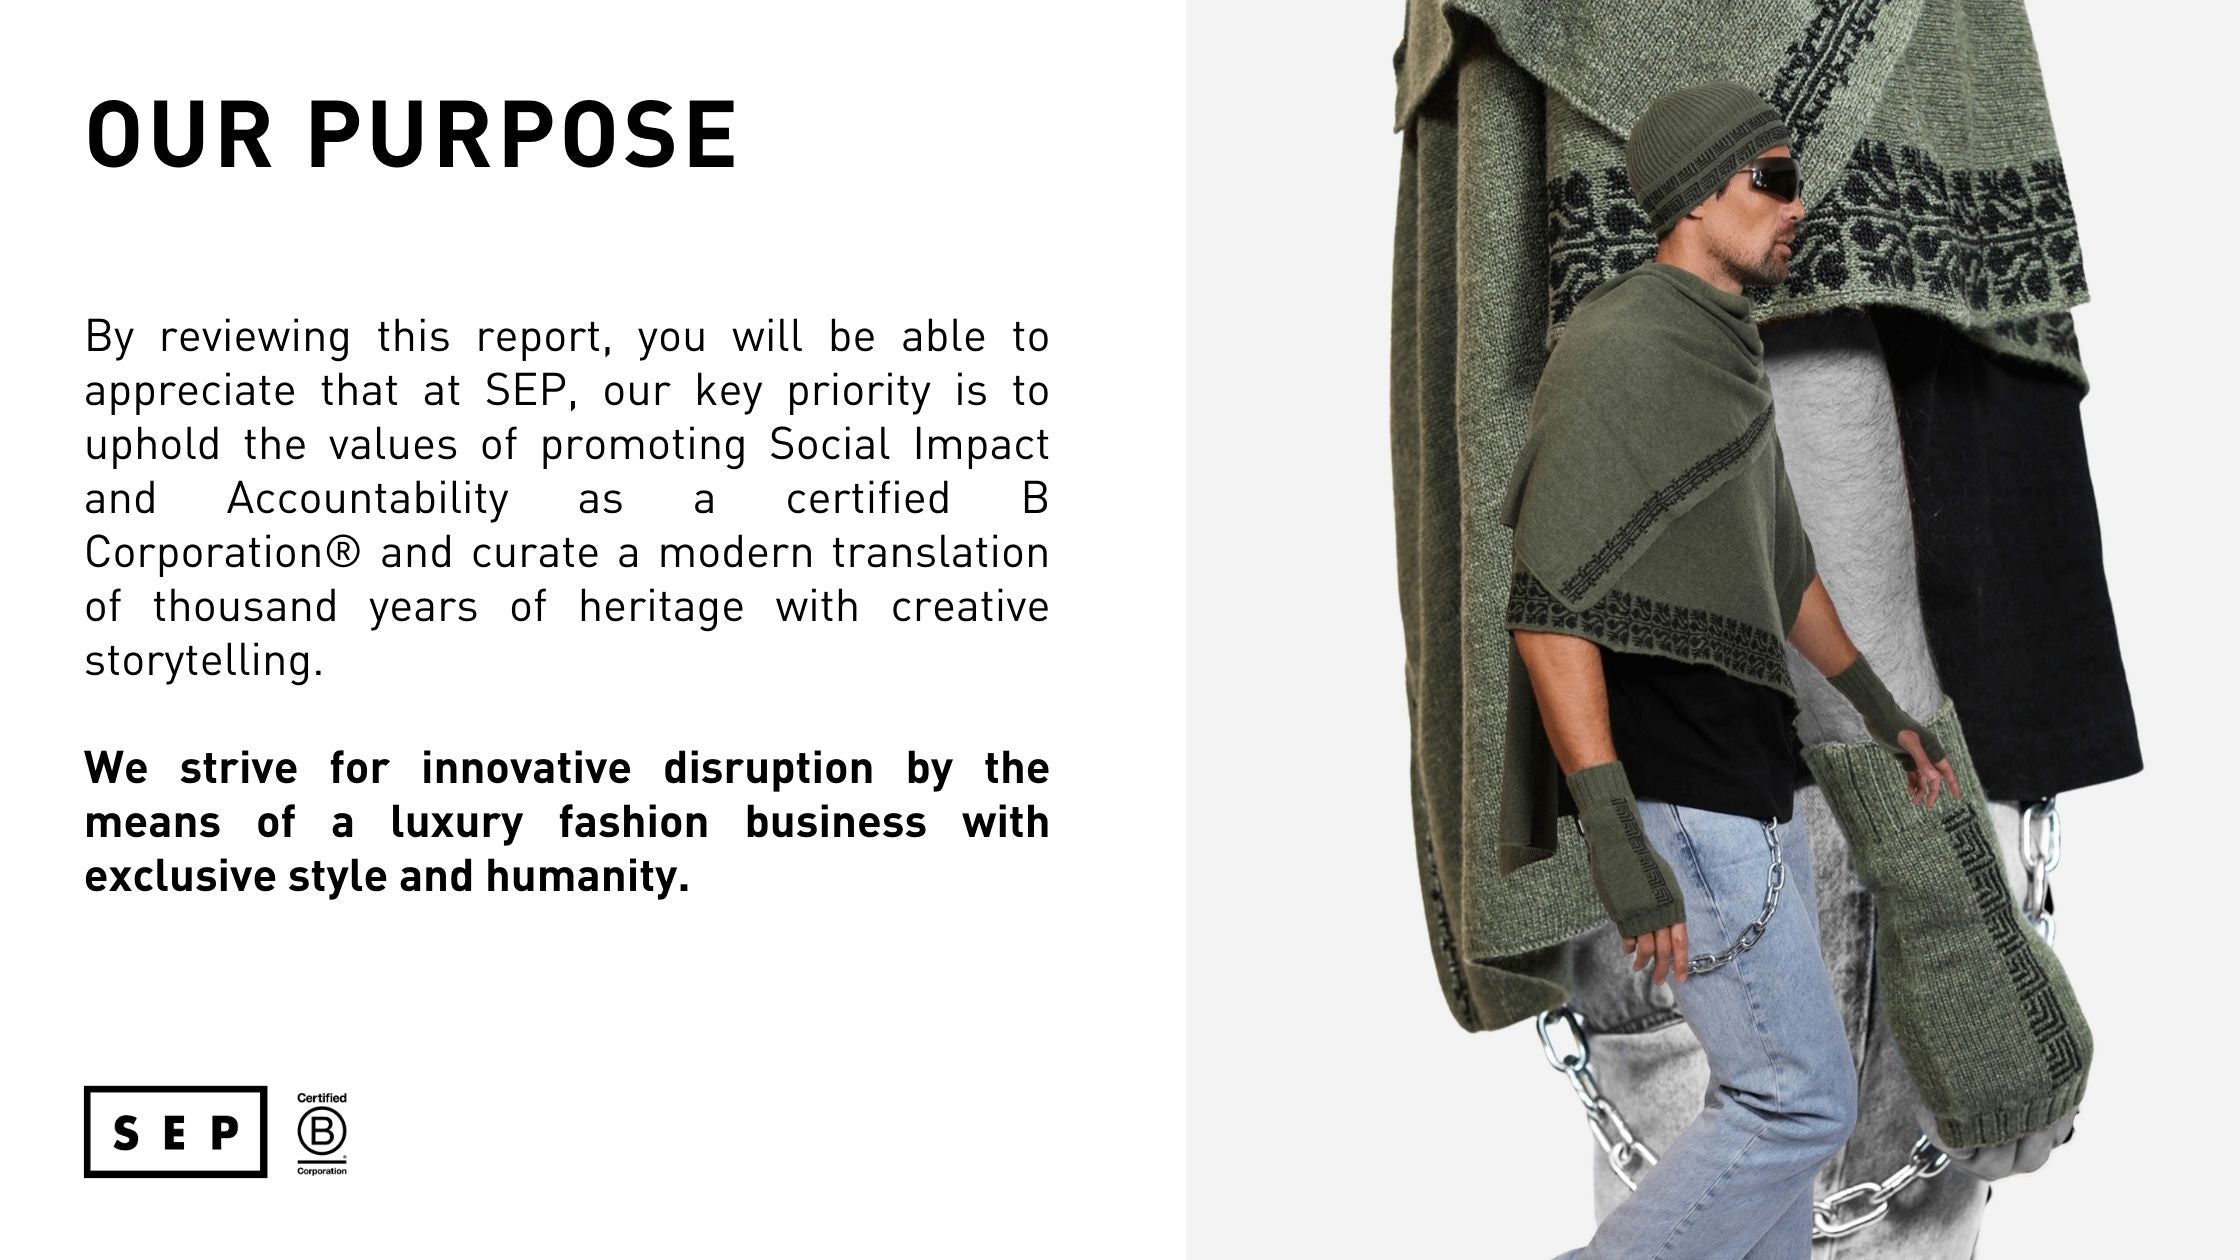 By reviewing this report, you would be able to understand that for SEP, our key priority is to uphold the value of promoting Social Impact and Accountability as a certified B Corporation® and curate a modern translation of thousand years heritage with a creative storytelling.   We strive for innovative disruption in the means a luxury fashion business embeds with exclusive style and humanity.